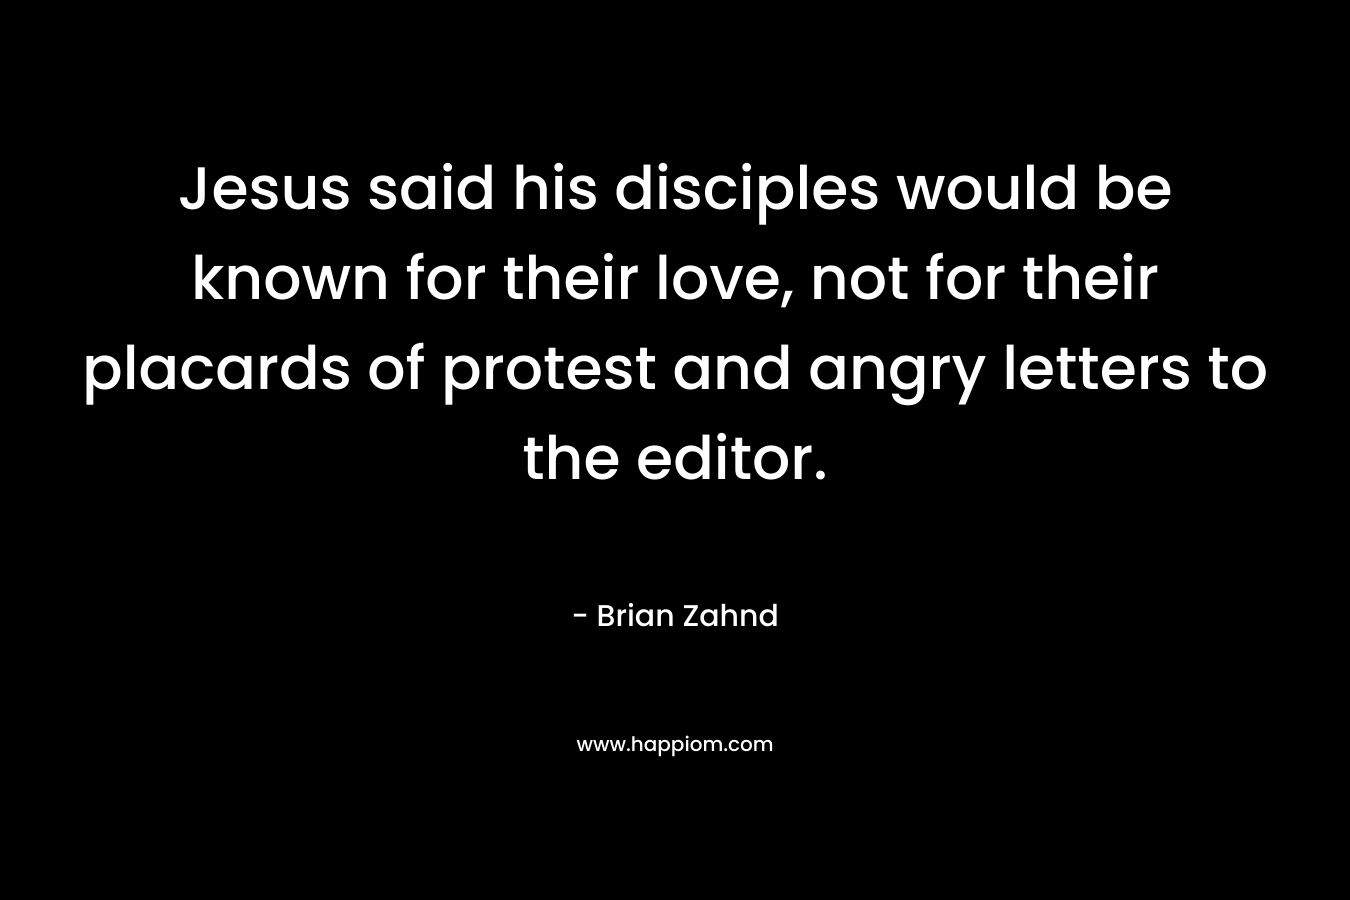 Jesus said his disciples would be known for their love, not for their placards of protest and angry letters to the editor. – Brian Zahnd